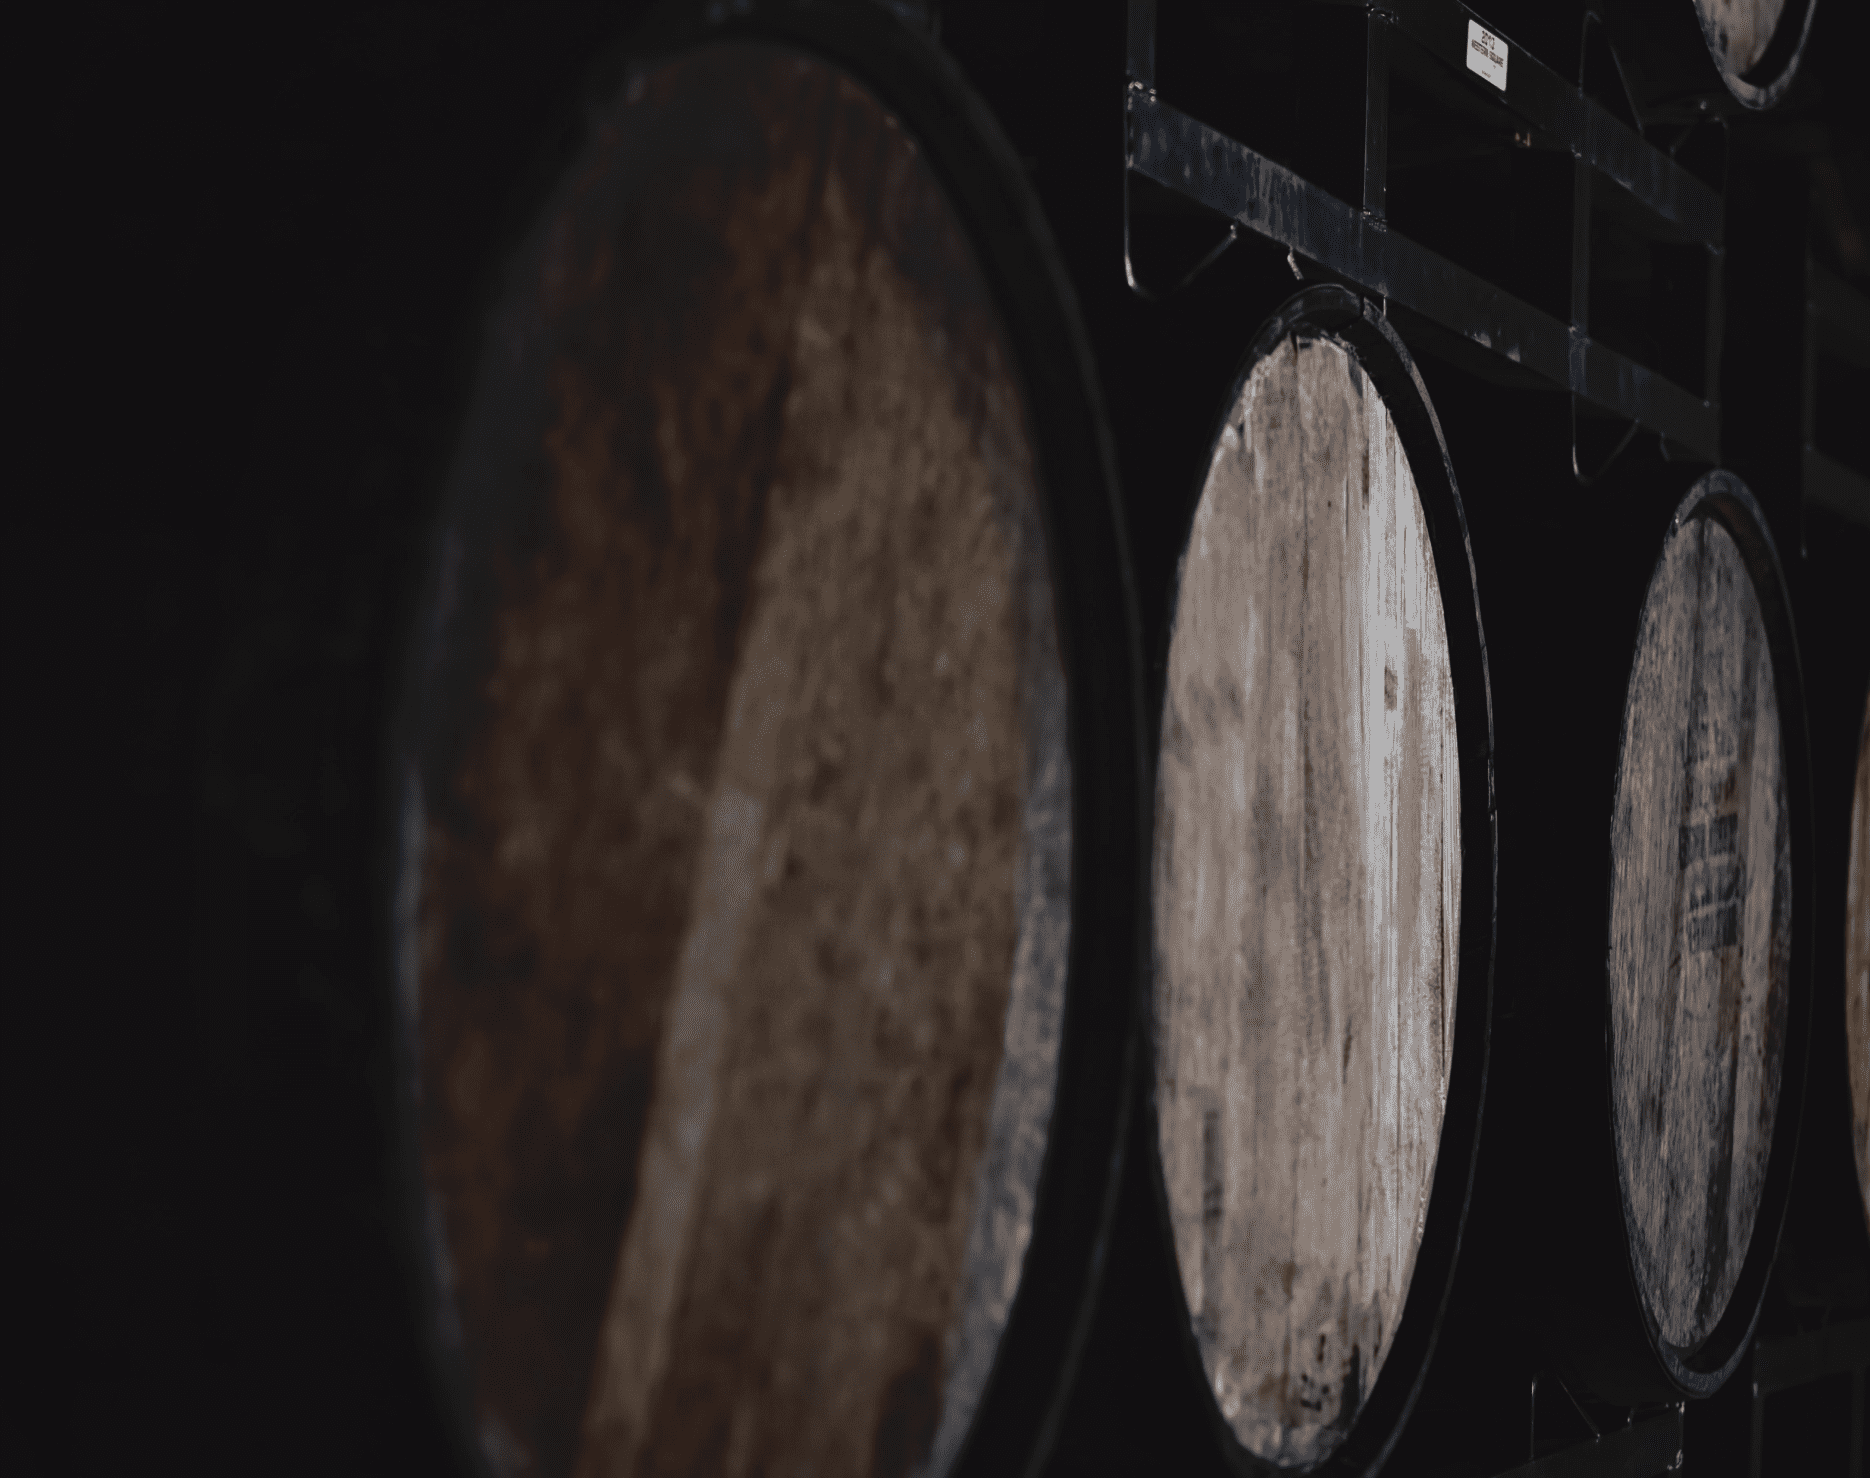 Wooden barrels stacked in a low light setting of the winery